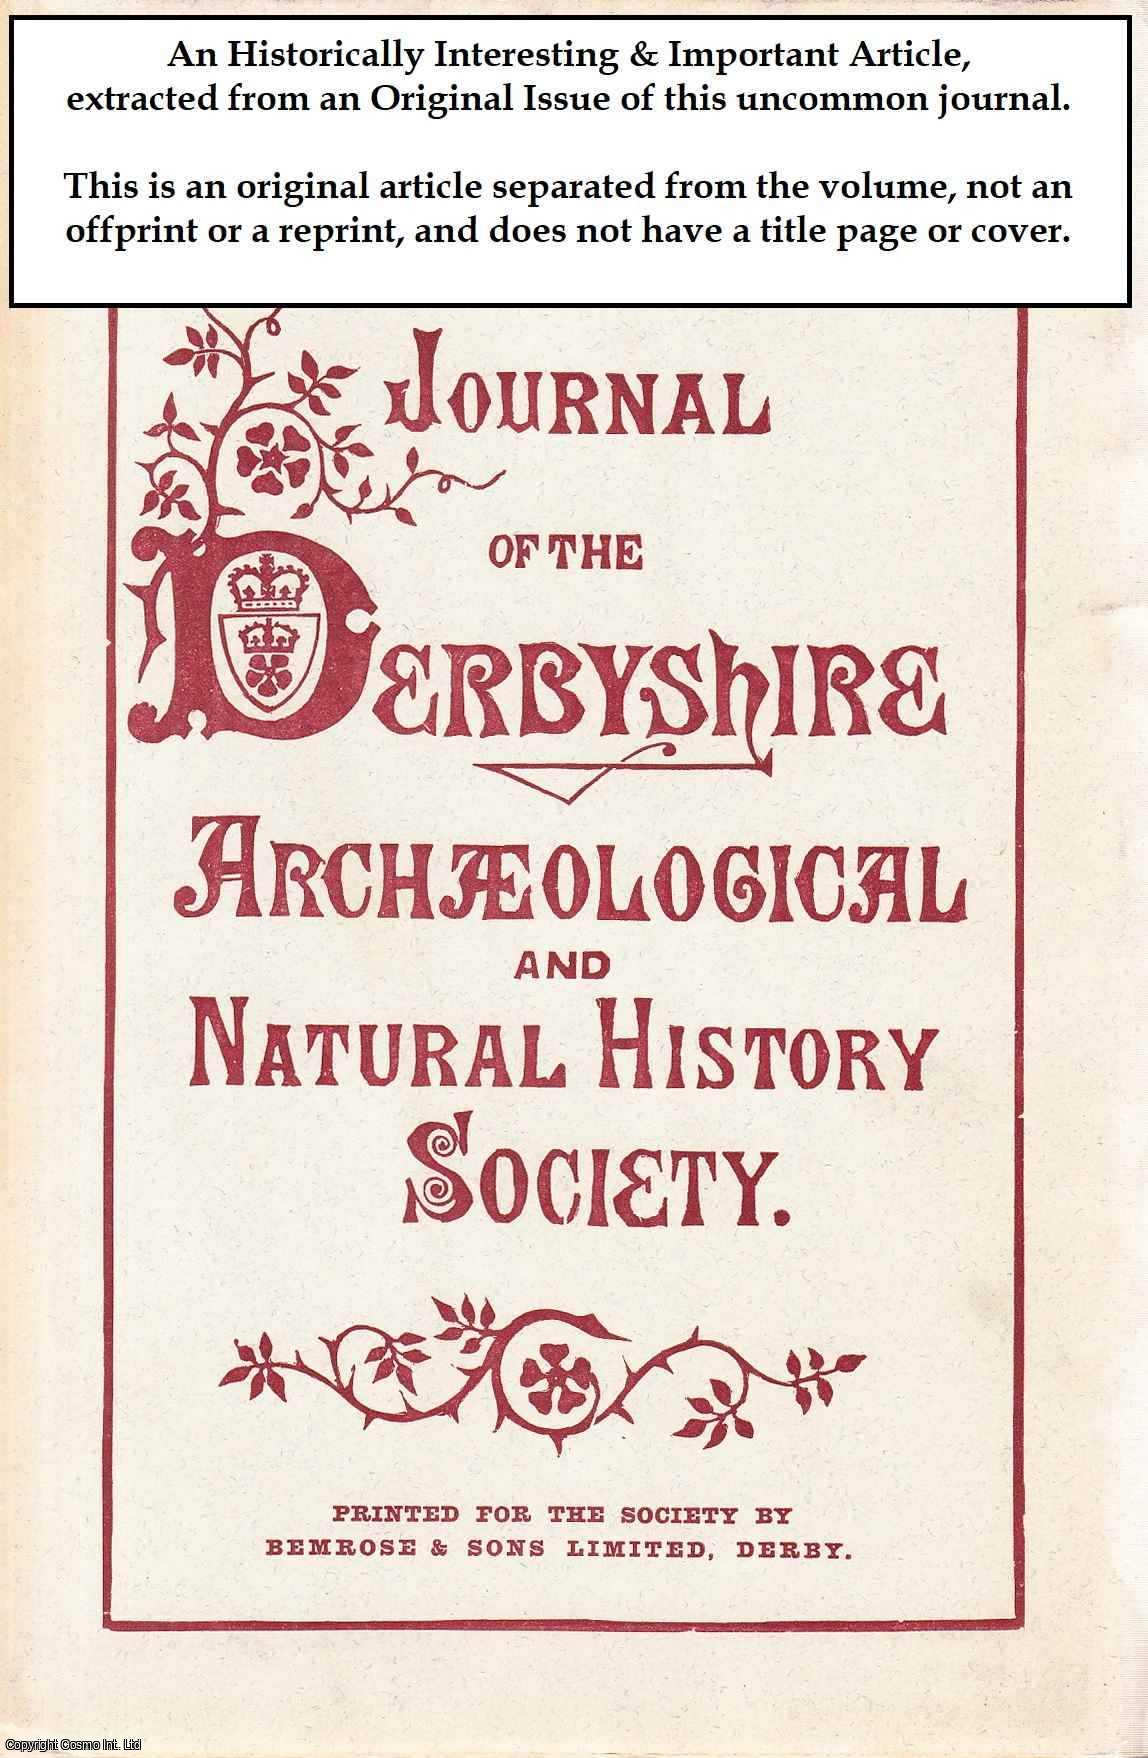 W. H. St. John Hope - The Recent Excavations on The Site of Dale Abbey, Derbyshire. An original article from the Journal of the Derbyshire Archaeological & Natural History Society, 1879.